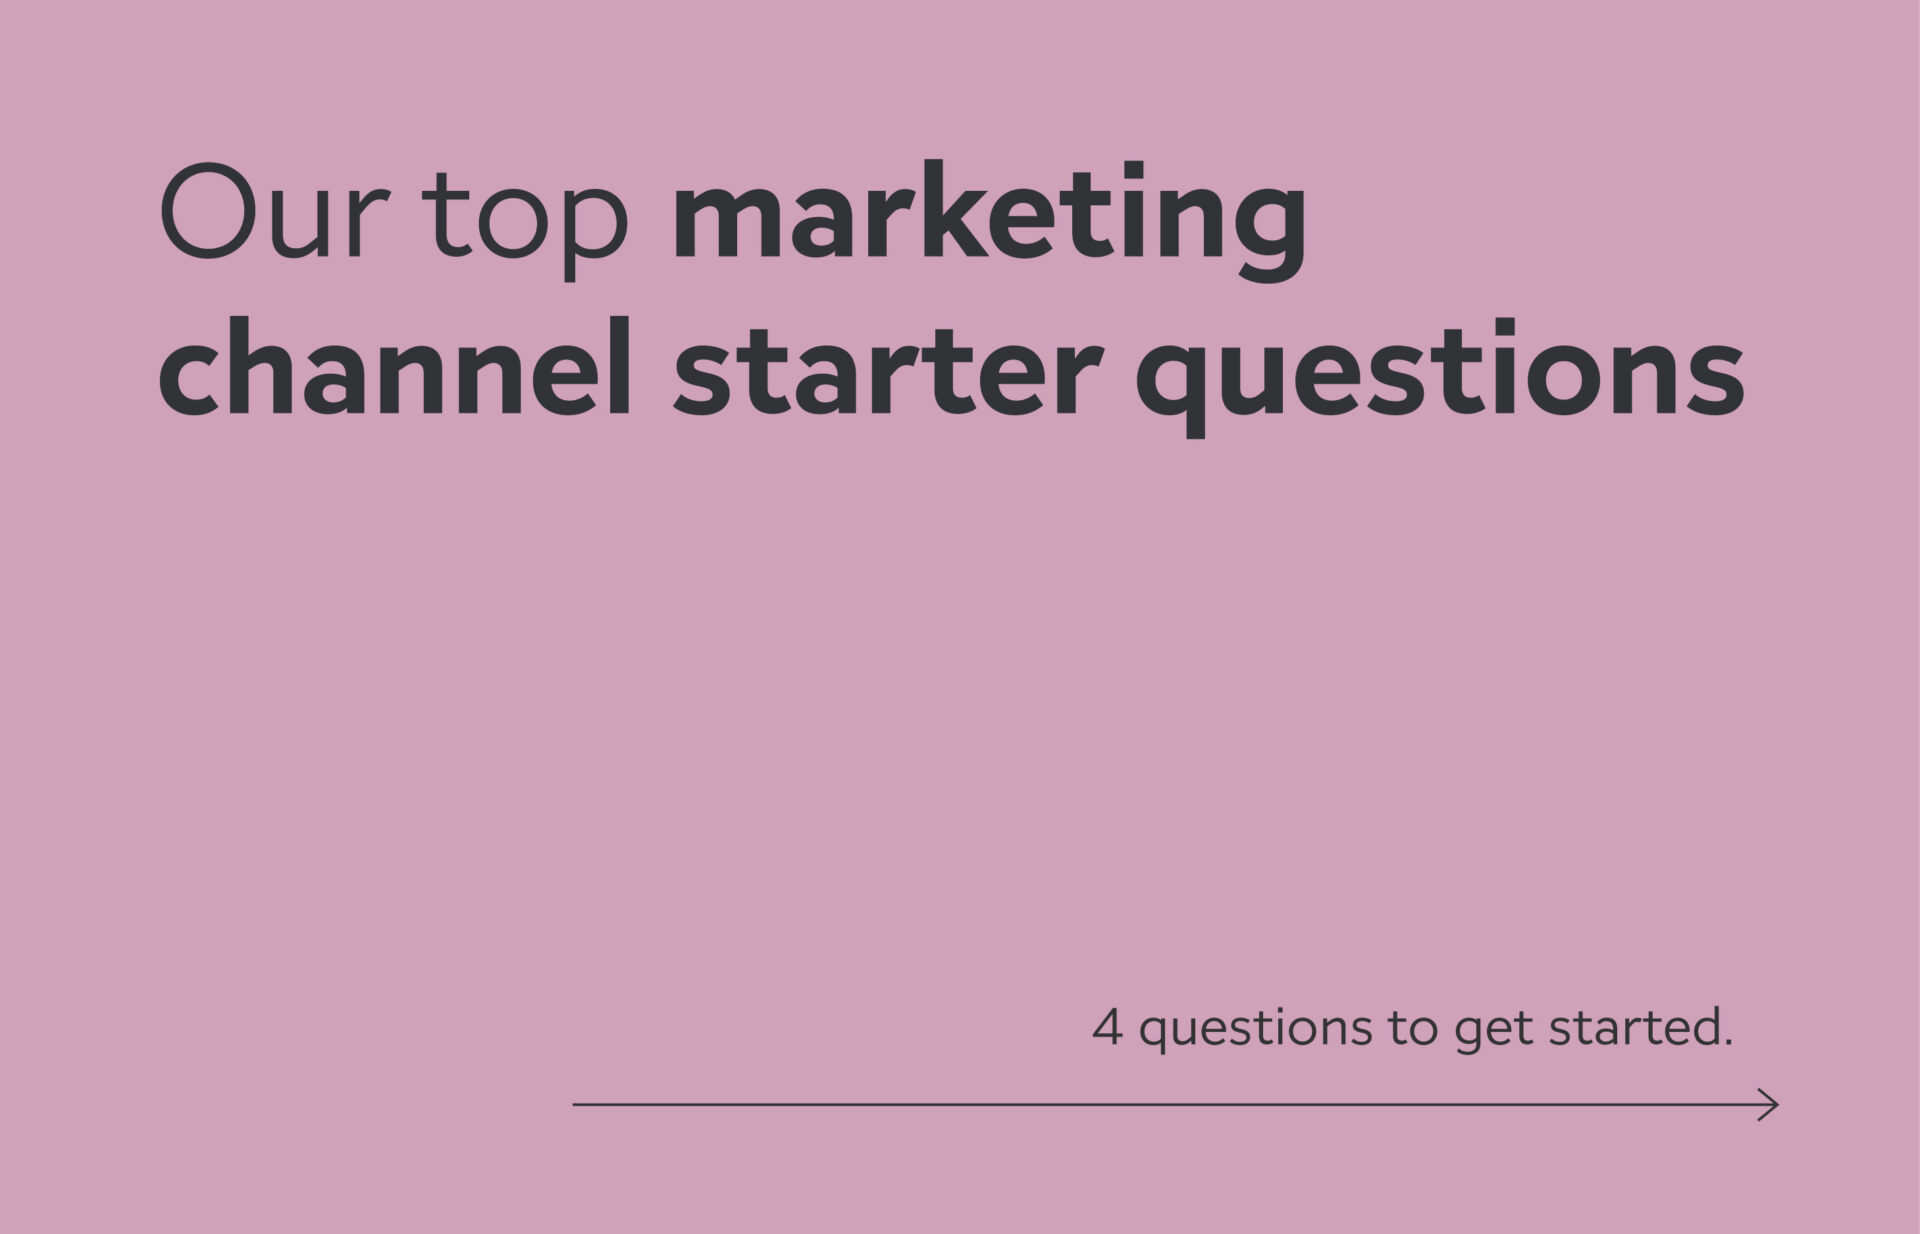 Our top marketing channel starter questions